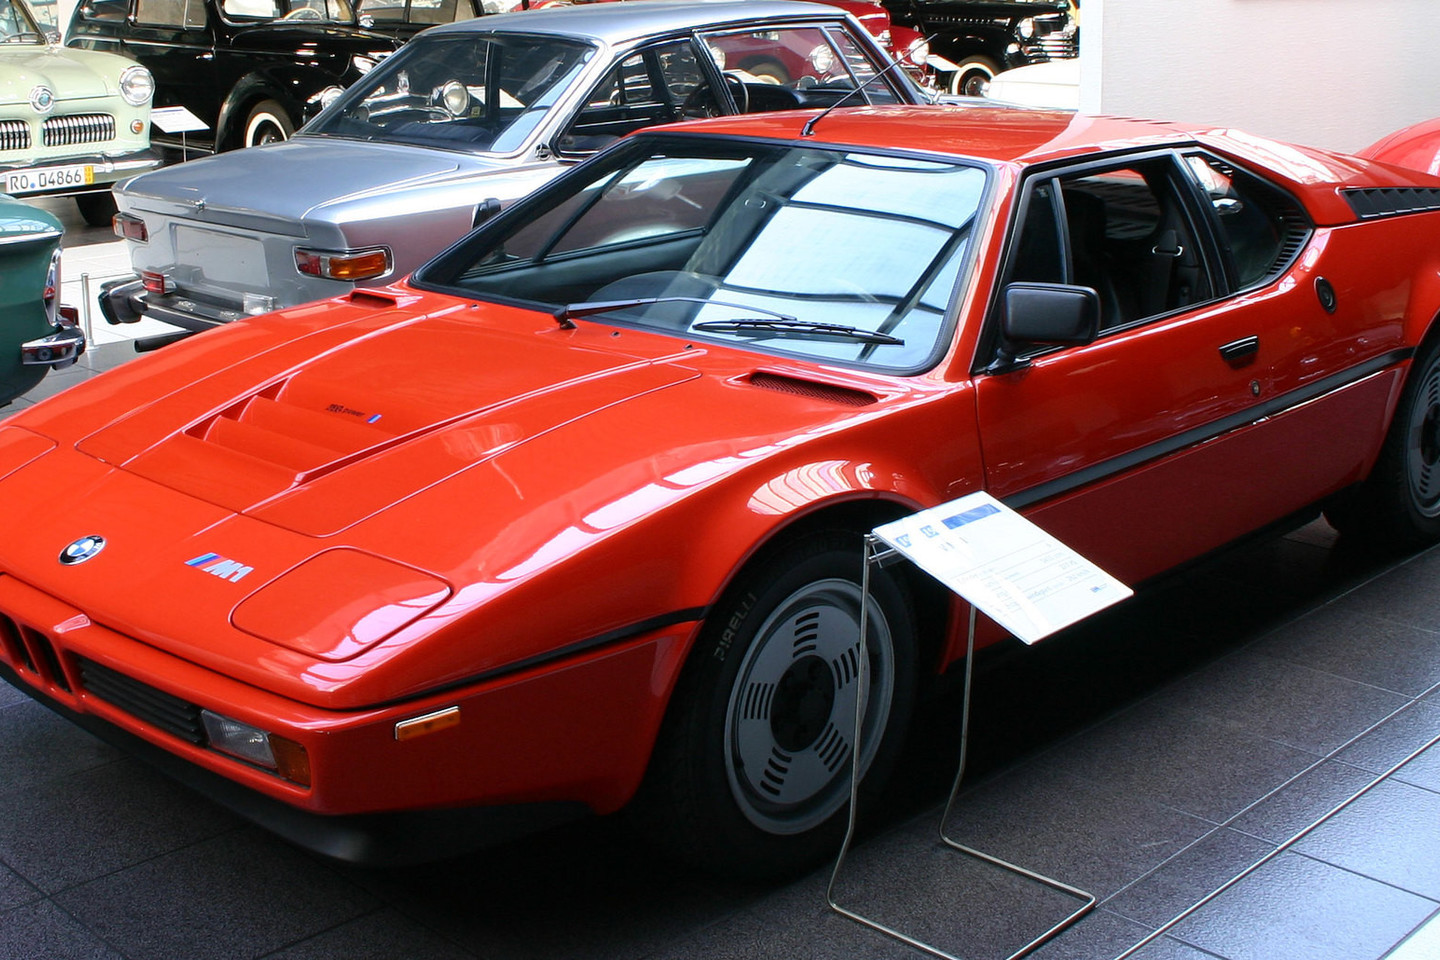 BMW M1 (1978-1981)<br>Creative commons nuotr.